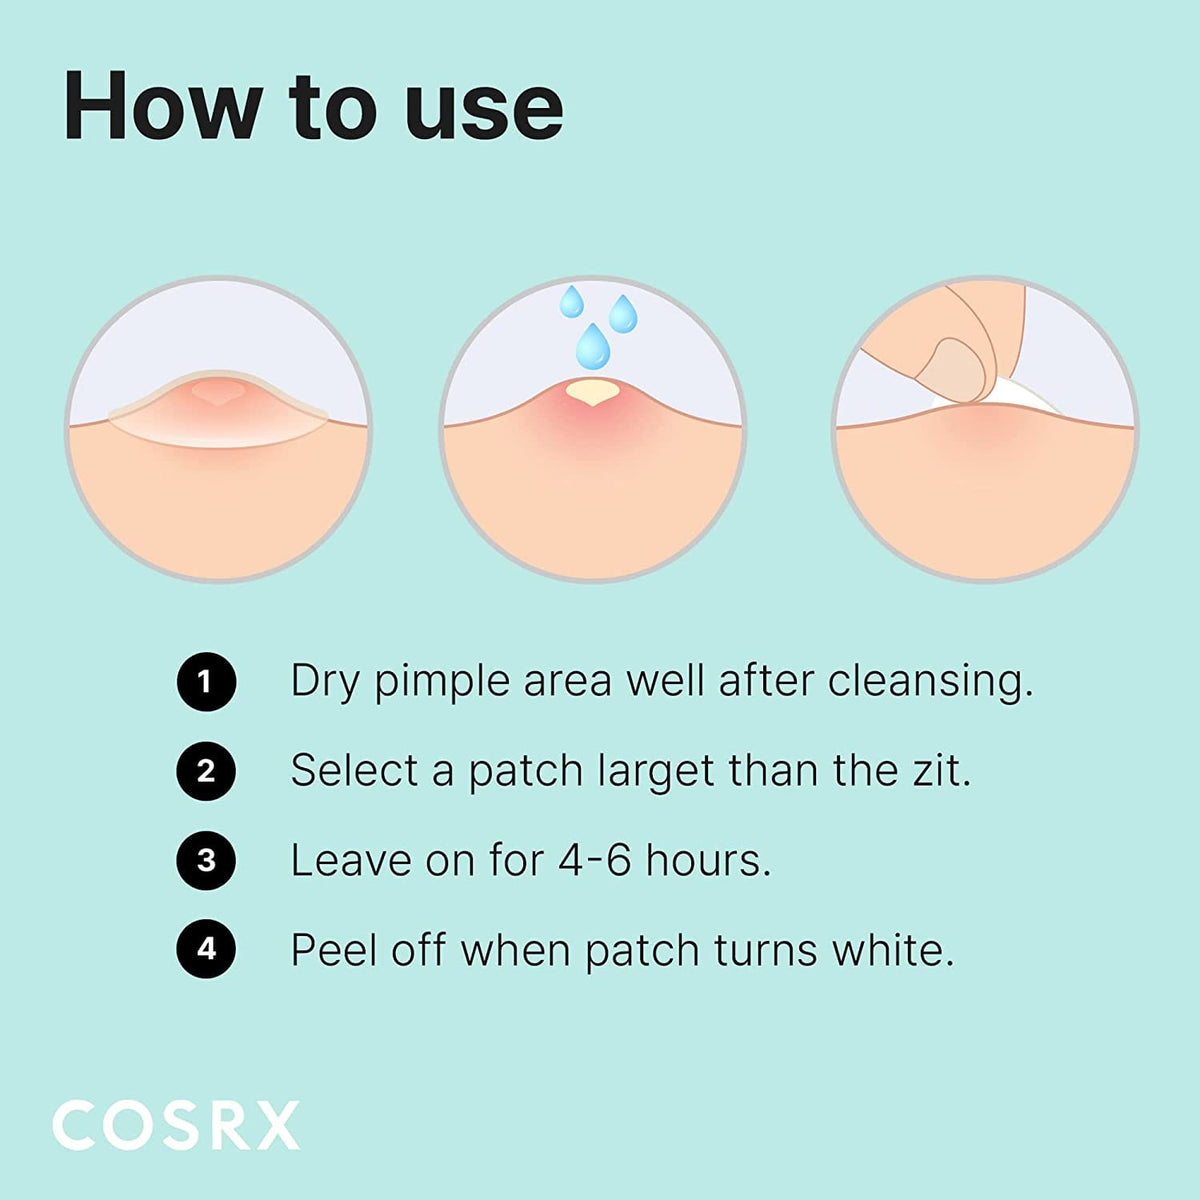 COSRX Acne Pimple Master Patch 2 Sheets